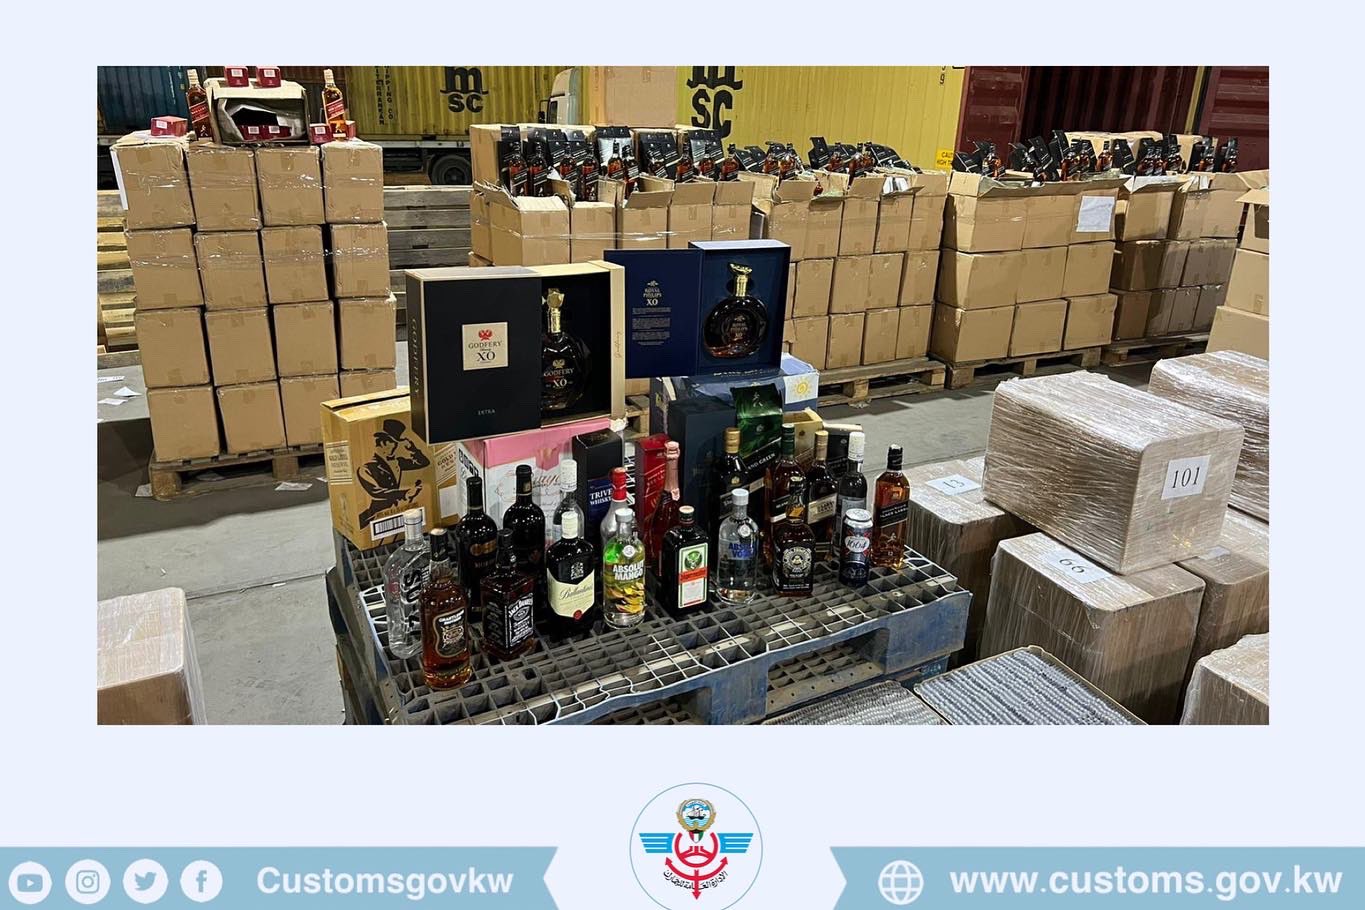 Kuwait Customs seized a shipment that contained two million Lyrica tablets and 7,474 liquor bottles